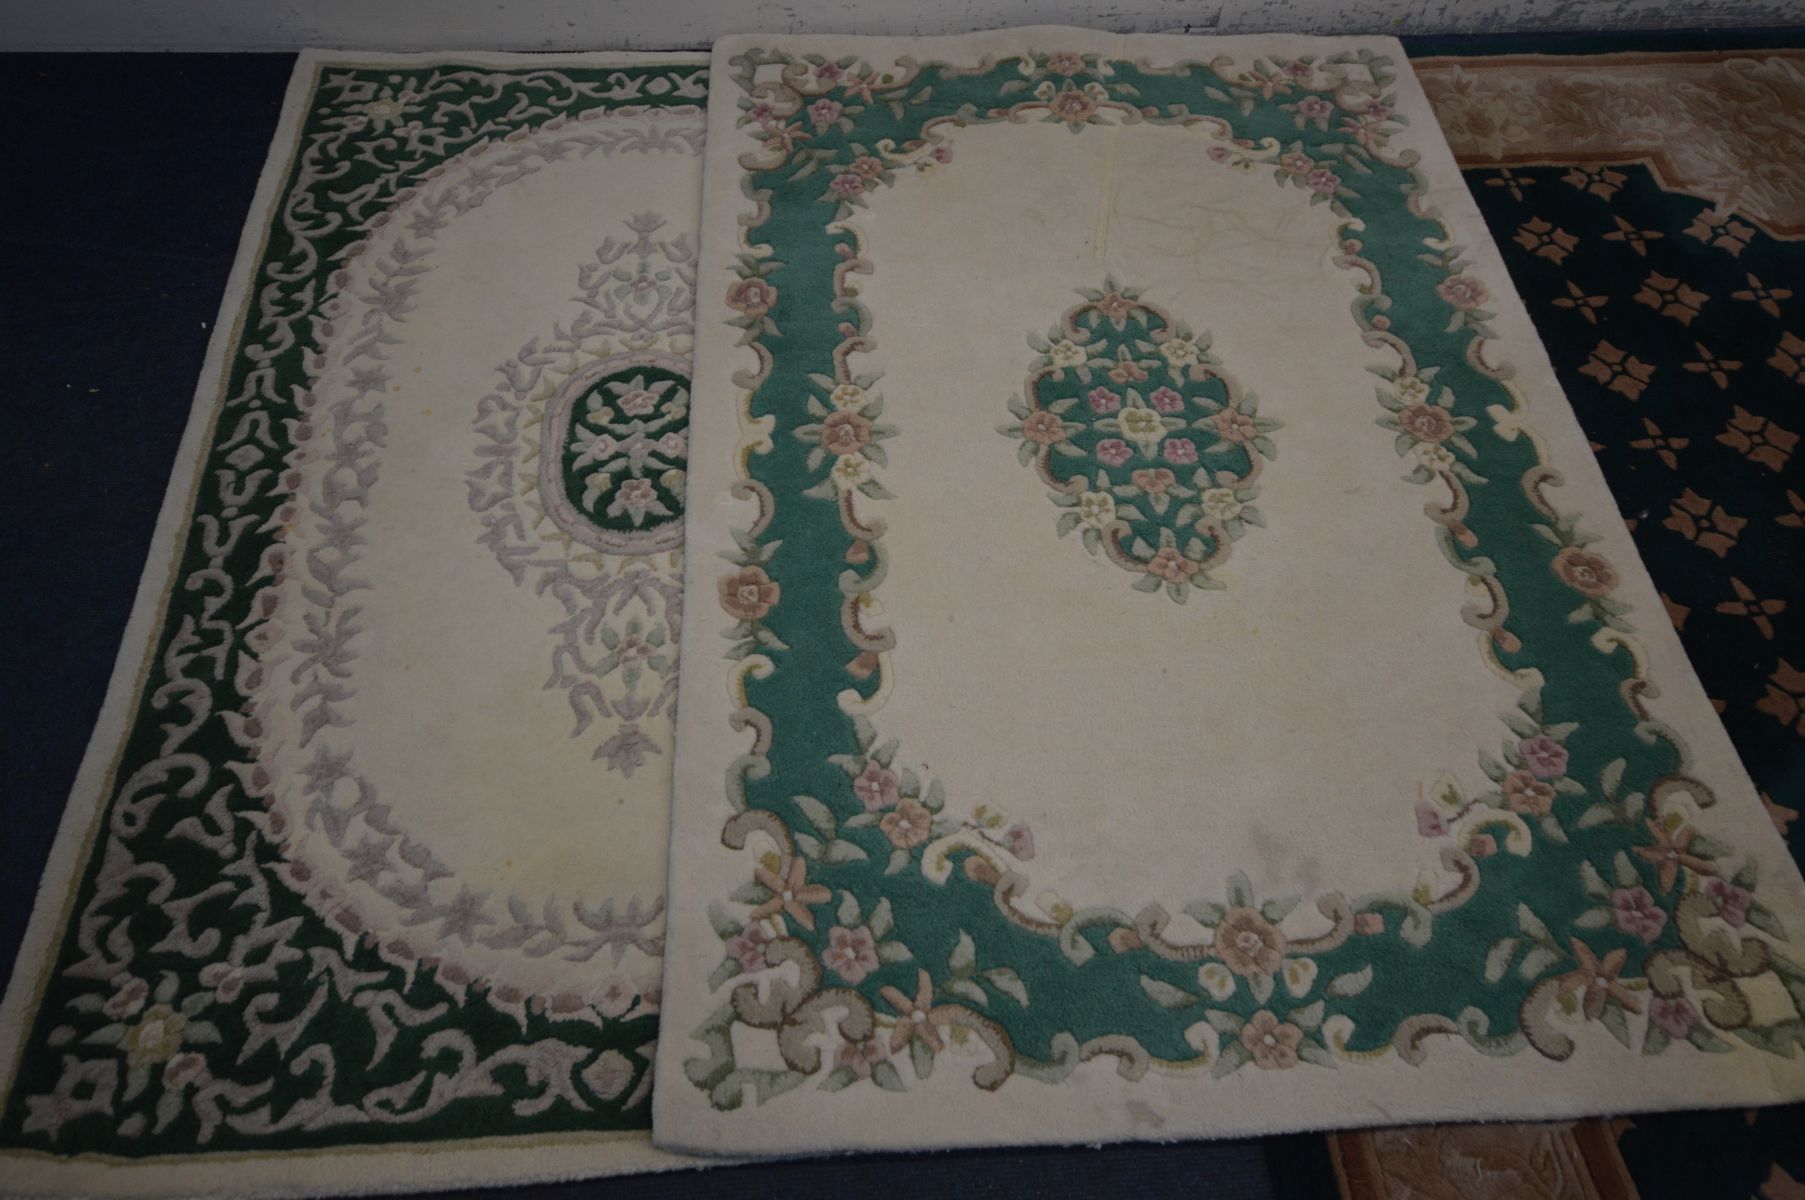 A LARGE GREEN CHINESE WOOLEN RUG, 240cm x 150cm, two similar cream and green ground rugs, both 180cm - Image 2 of 4